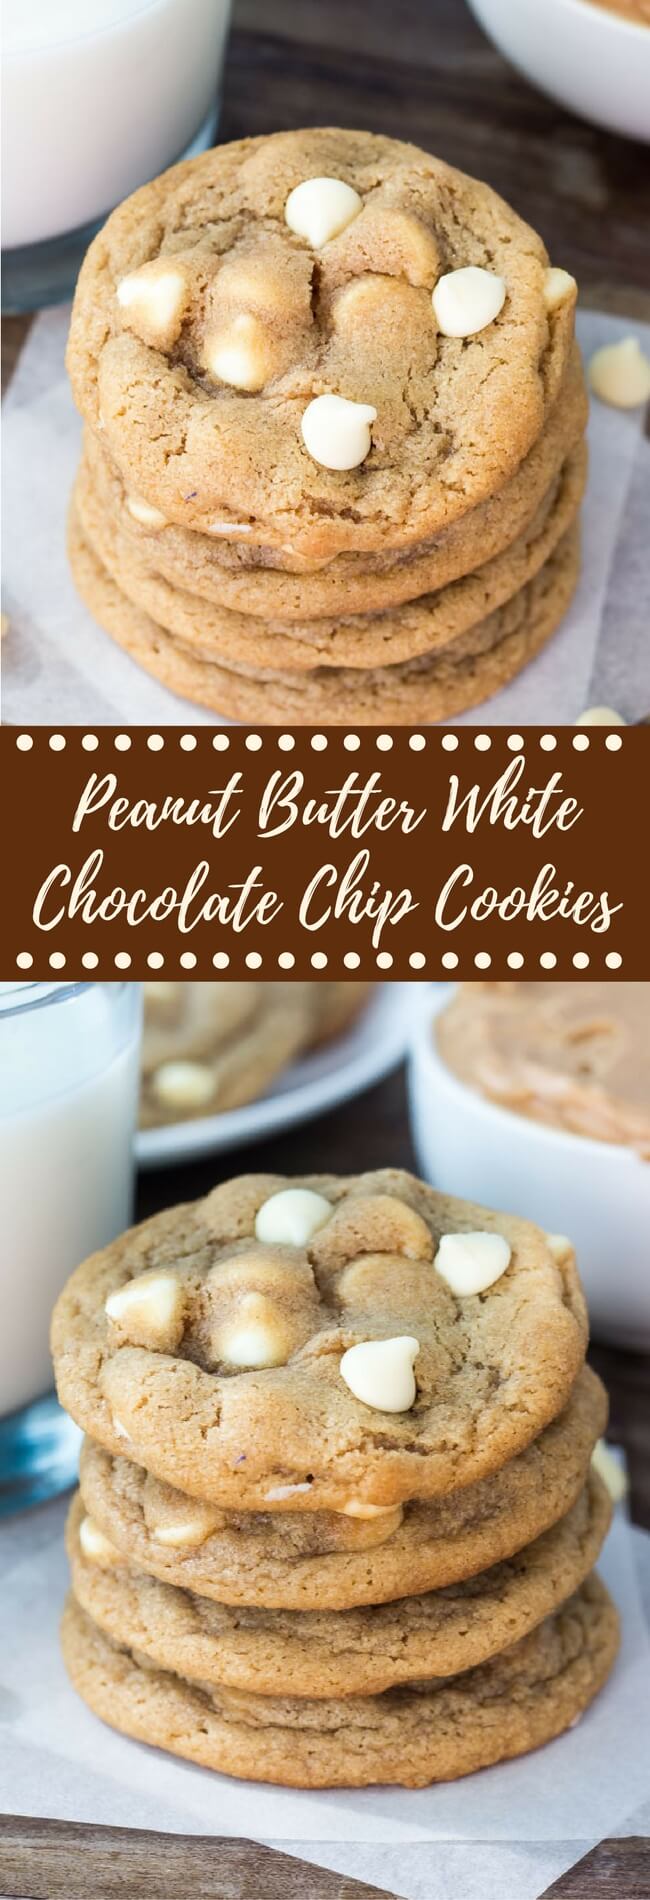 Peanut Butter White Chocolate Chip Cookies - Just so Tasty